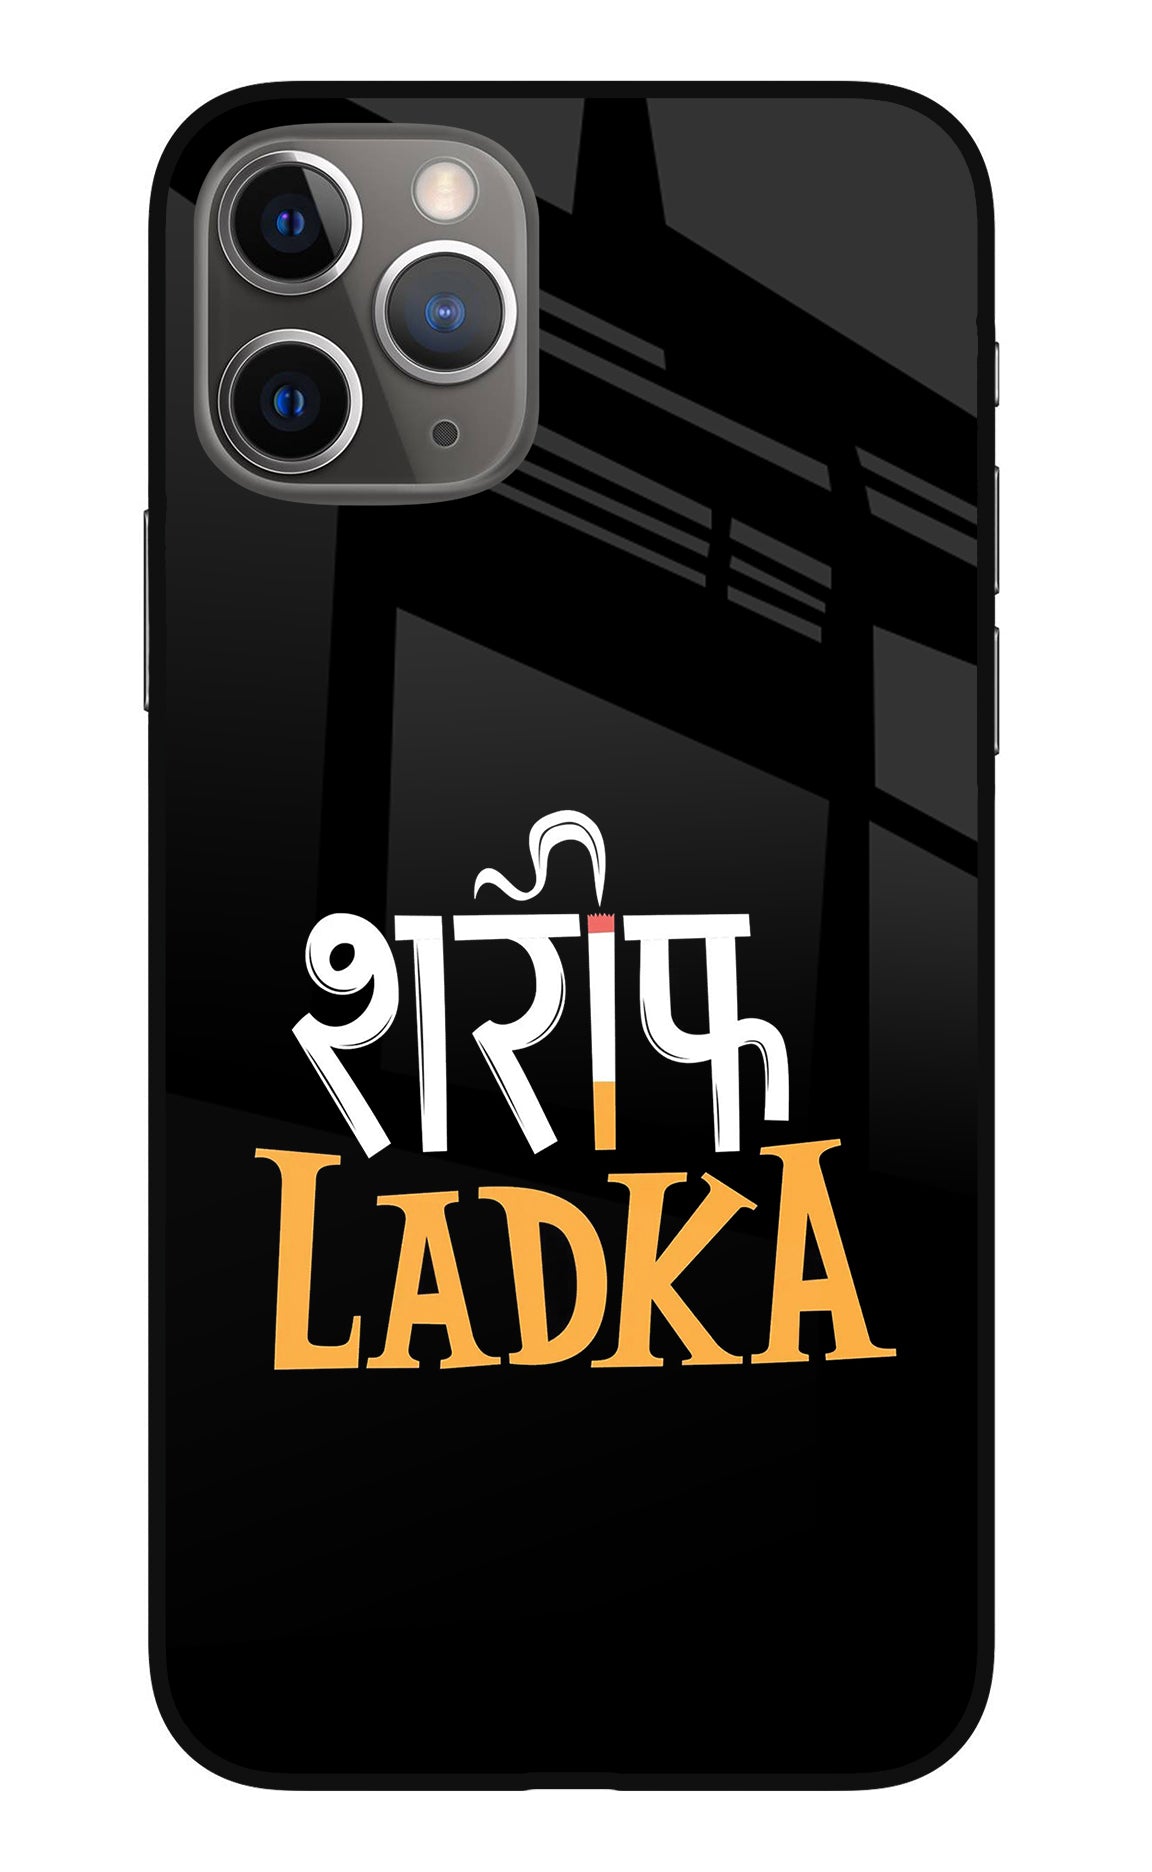 Shareef Ladka iPhone 11 Pro Max Back Cover